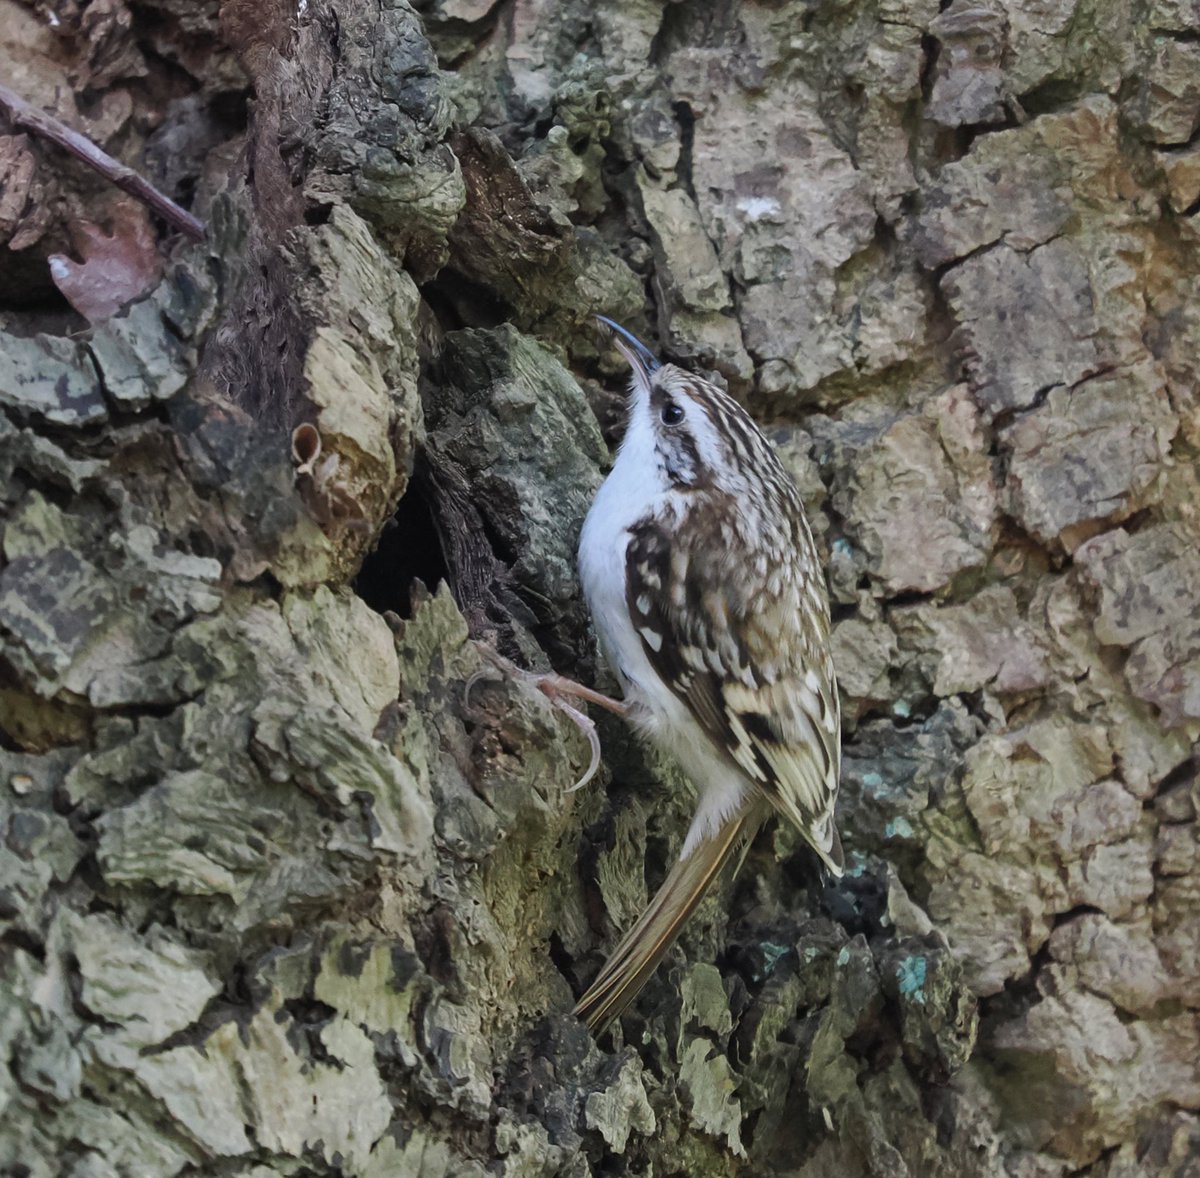 Tree Creeper about to enter his nest hole with a morsel for his partner who is probably sitting on eggs. Eastbridge, Suffolk #birds #birdphotography #wildlife #wildlifephotography #nature #NaturePhotography @Natures_Voice @BtoSuffolk @suffolkwildlife @NatureUK @BBCSpringwatch